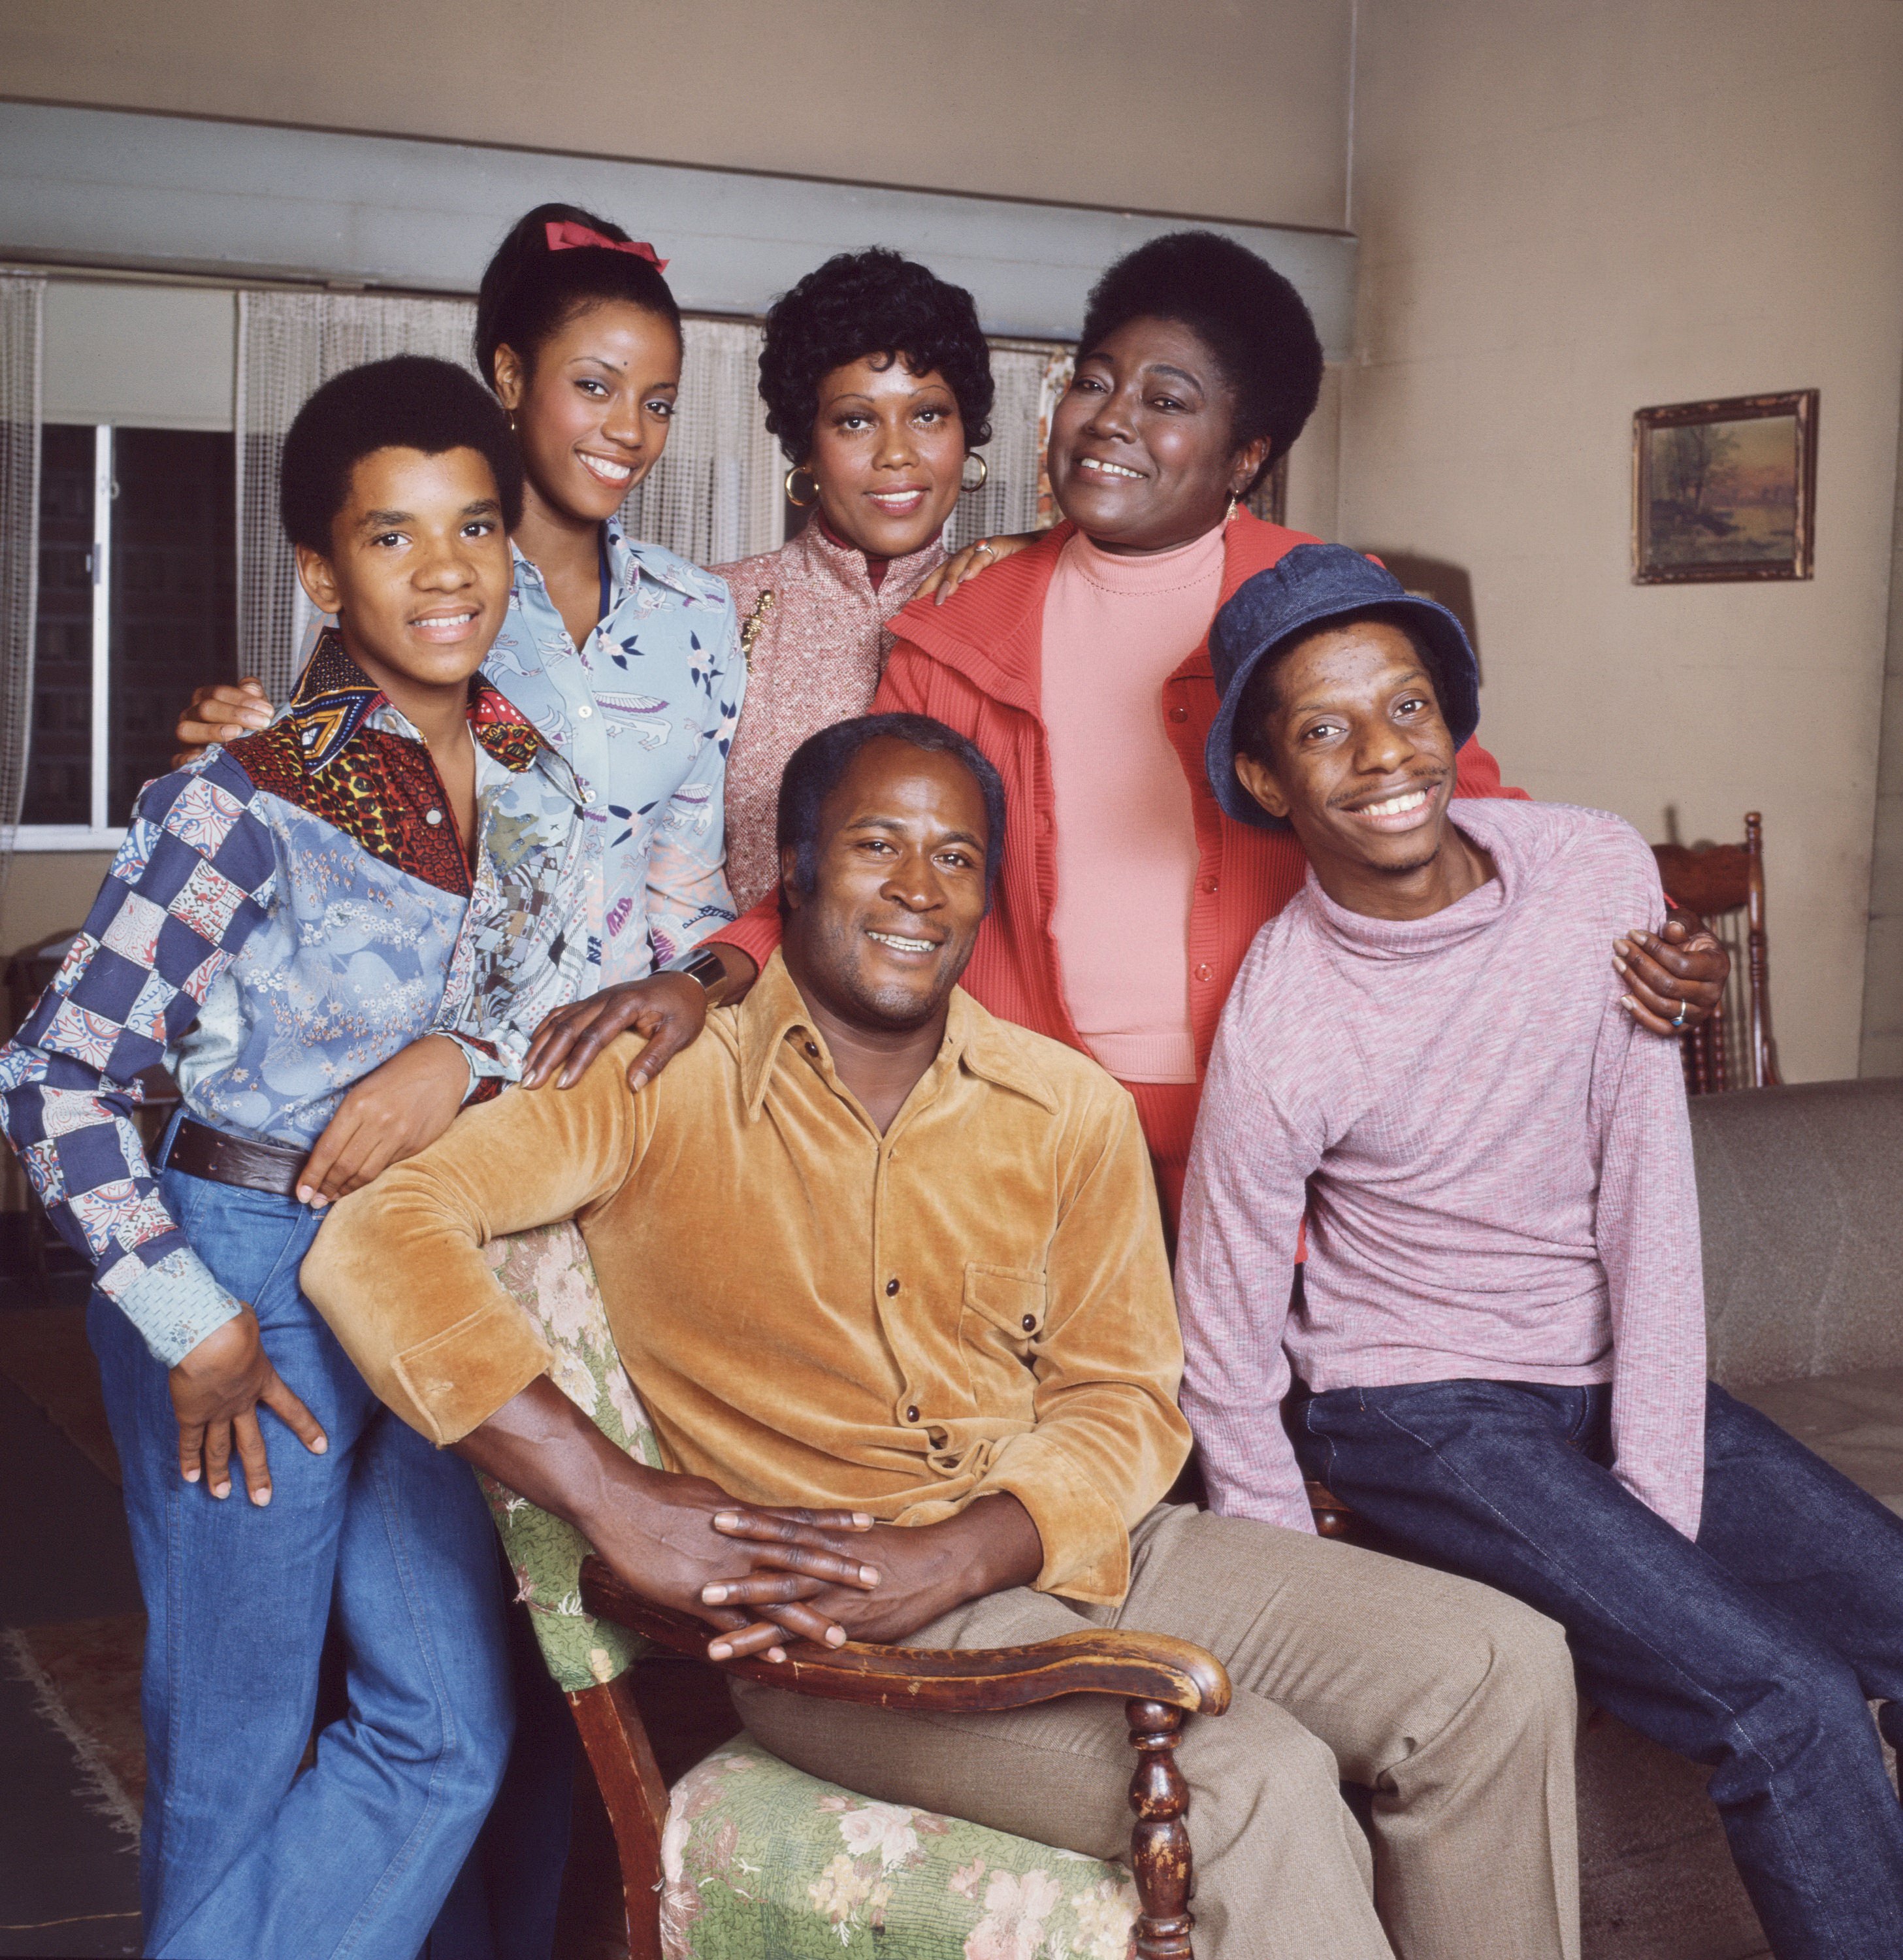 A portrait of the cast of 'Good Times': Pictured are, front row, American actors John Amos as James Evans (left) and Jimmie Walker as J.J. Evans; back row, from left, Ralph Carter as Michael Evans, Bern Nadette Stanis as Thelma Evans, Ja'net DuBois as neighbor Willona Woods, and  Esther Rolle as Florida Evans